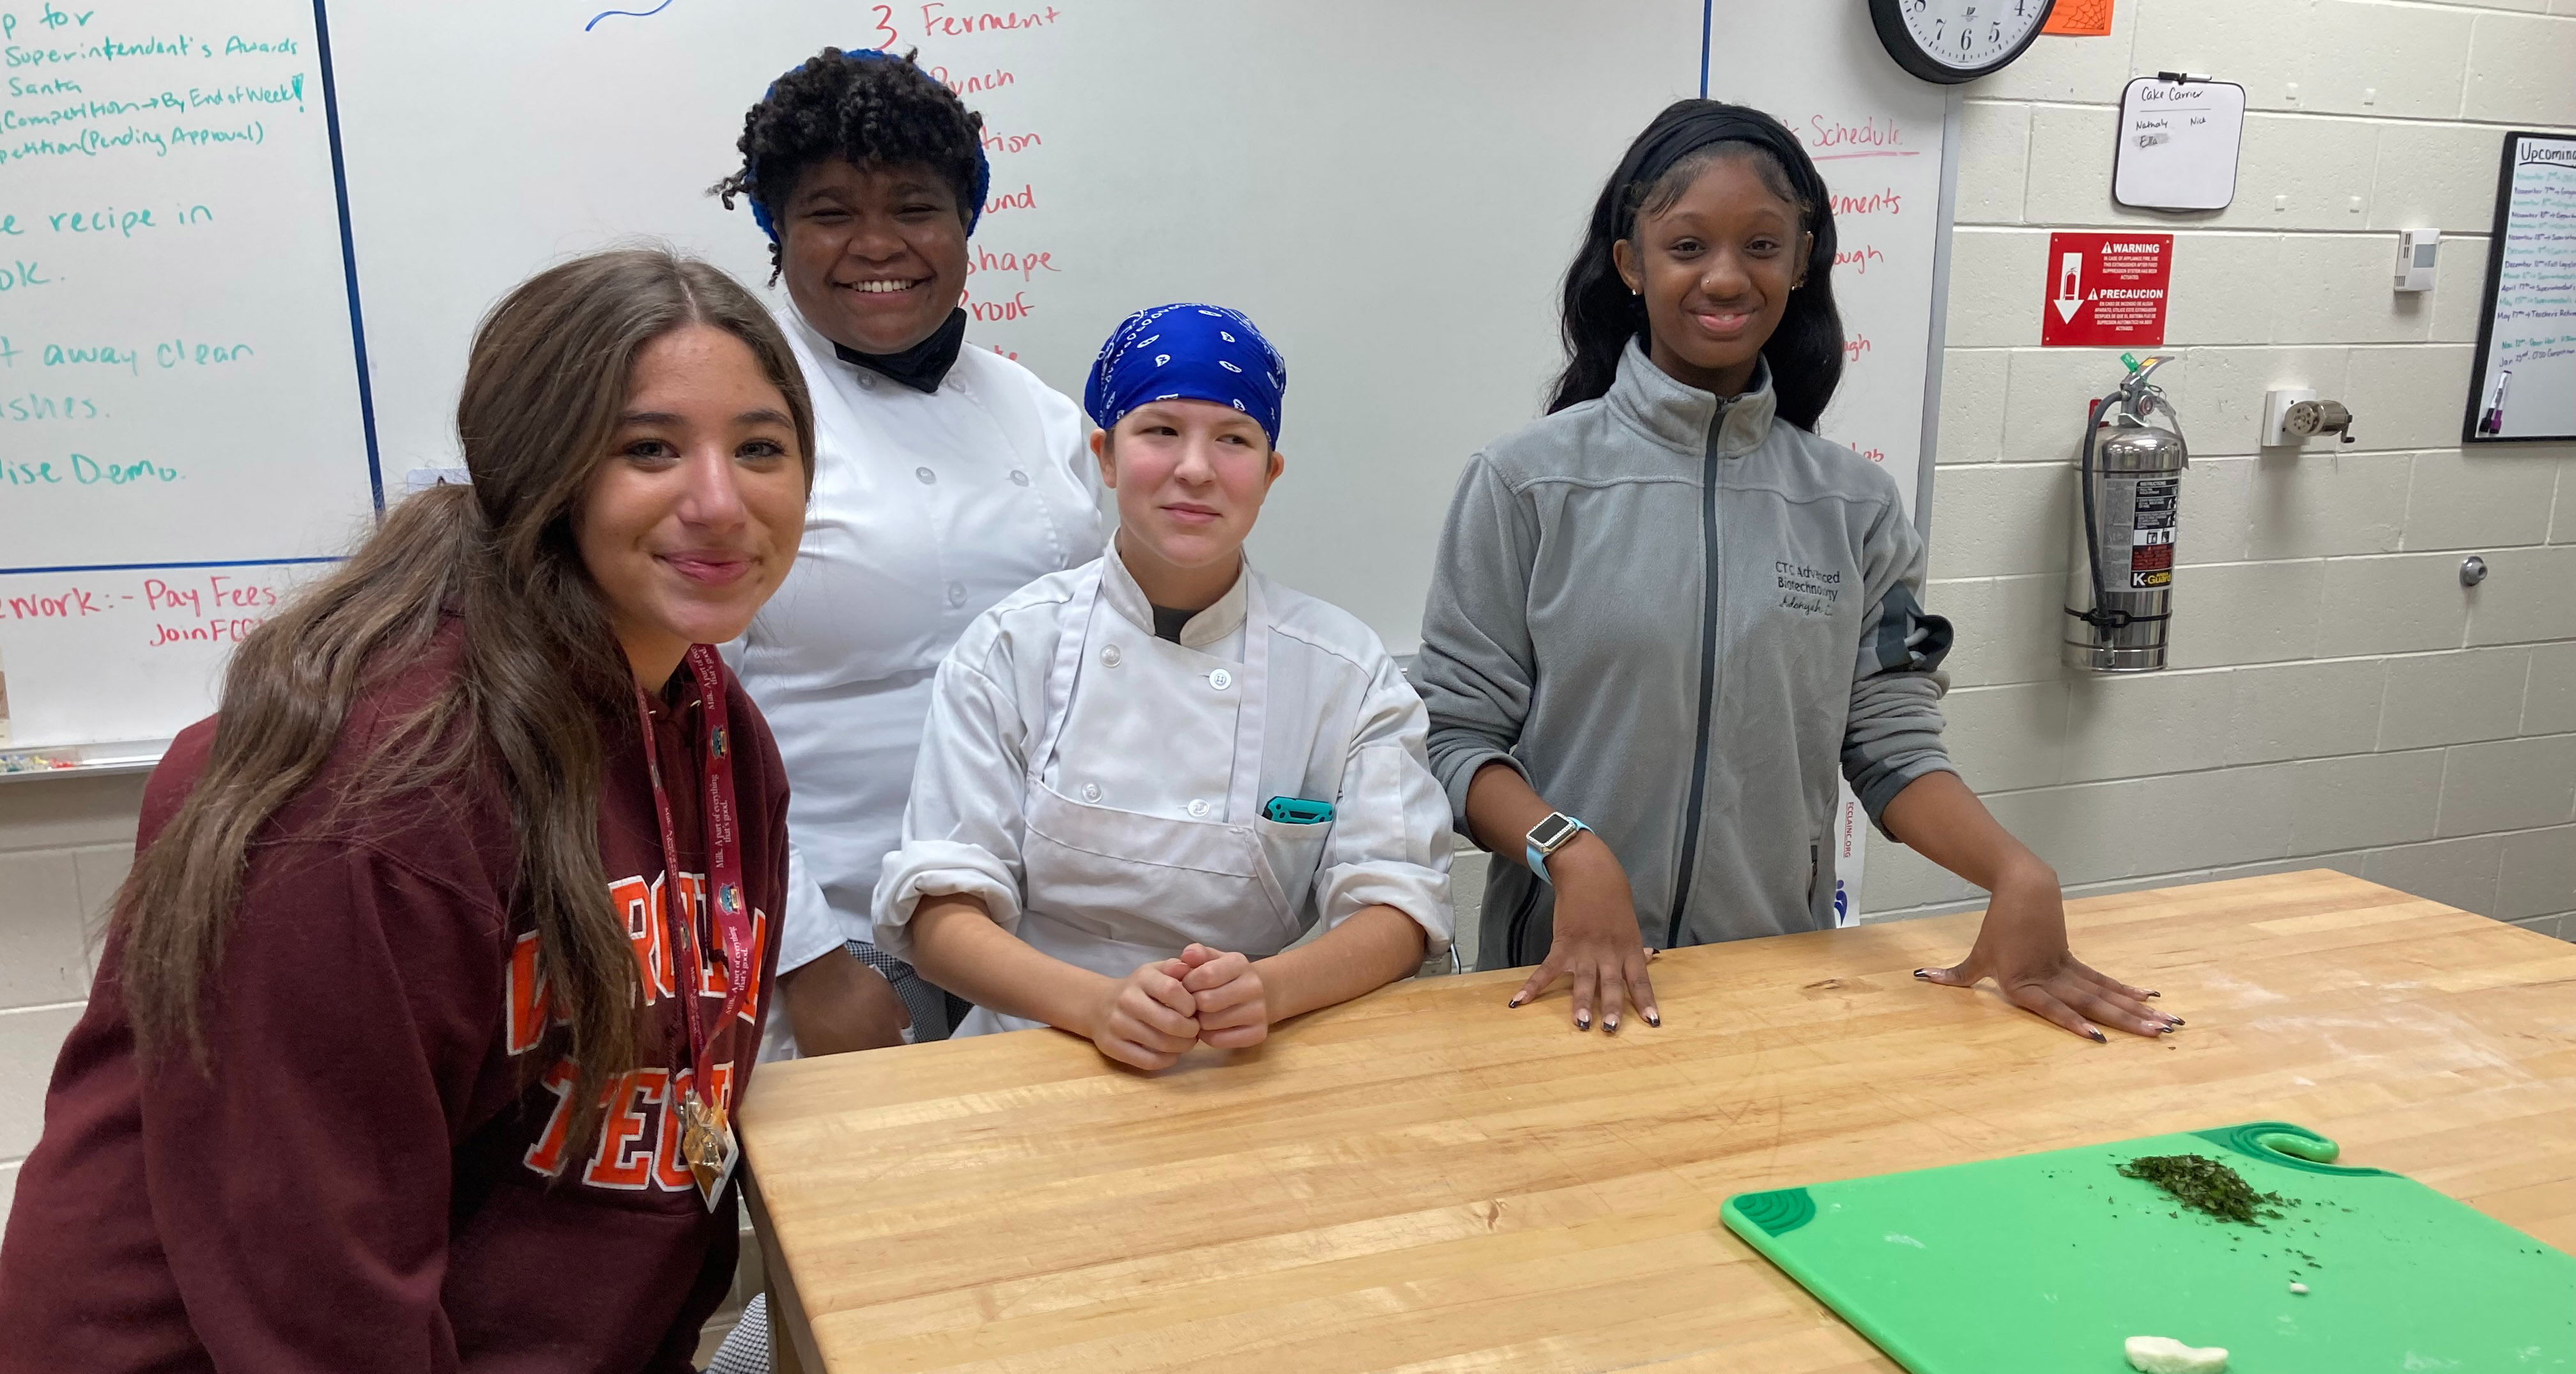 A culinary teacher and three students pose for a photo